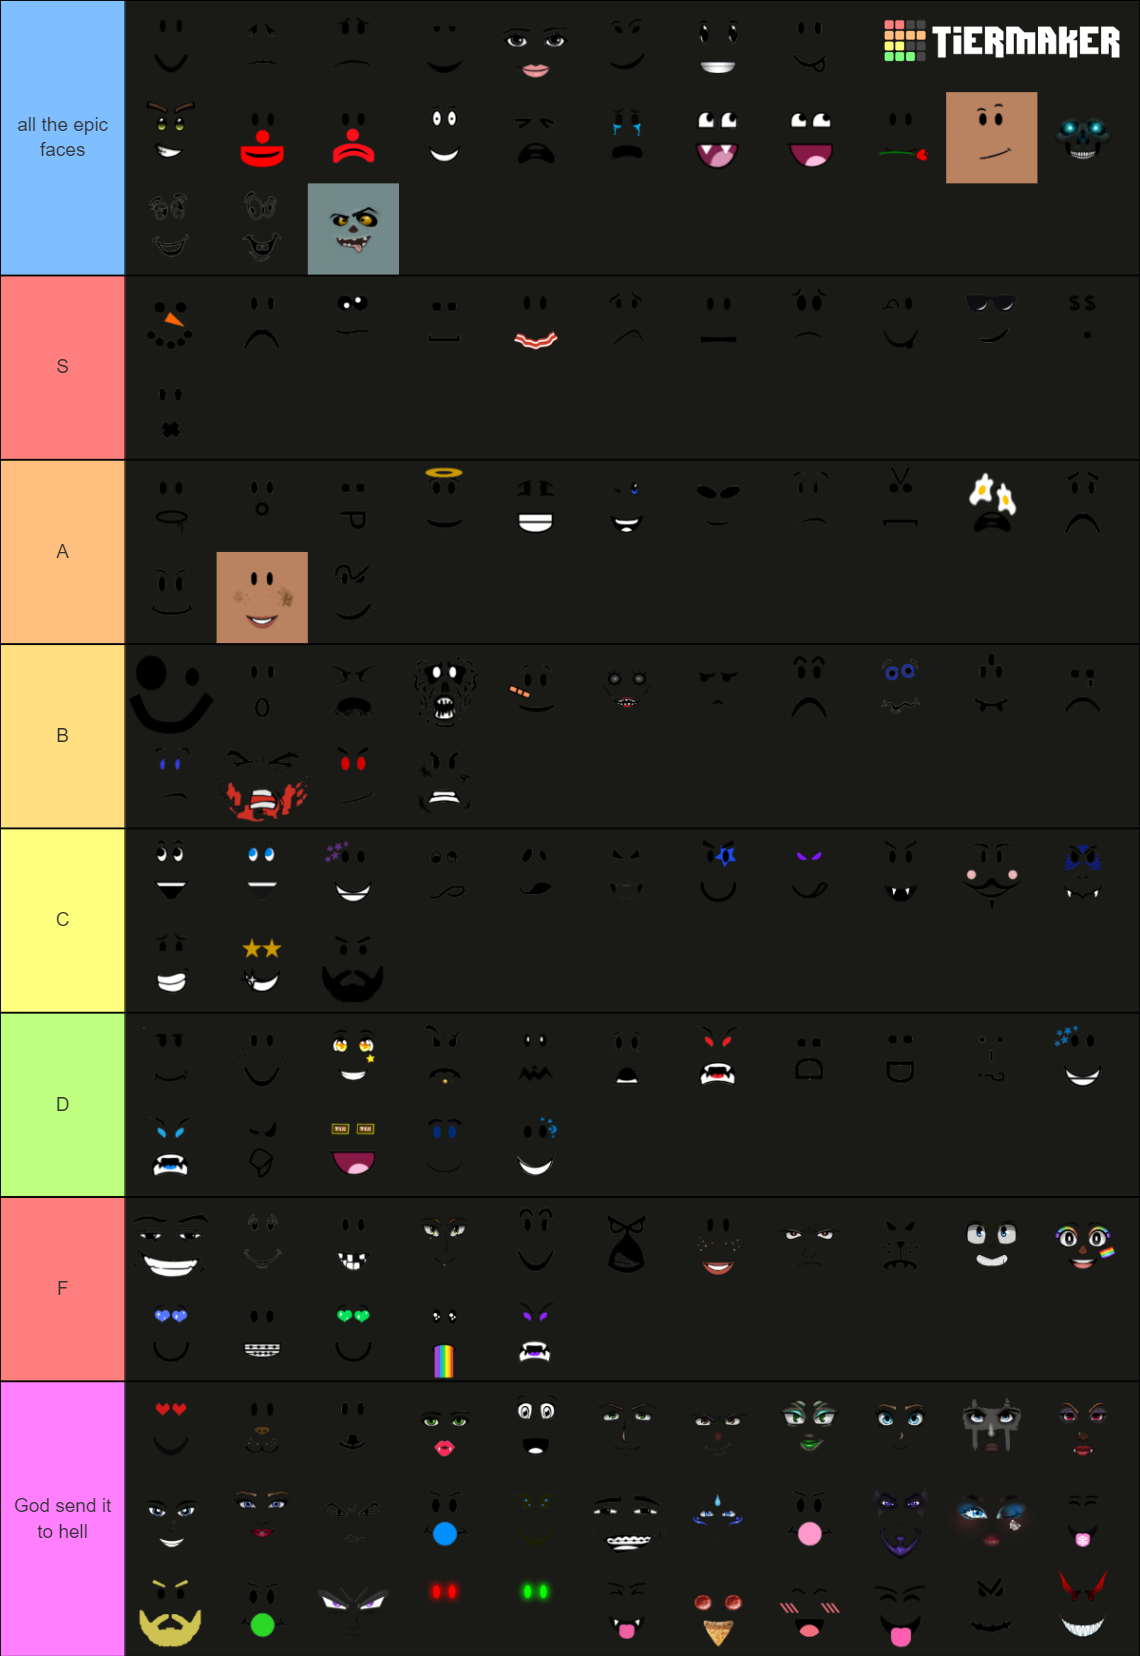 OVER 600+ ROBLOX FACES. Tier List (Community Rankings) - TierMaker